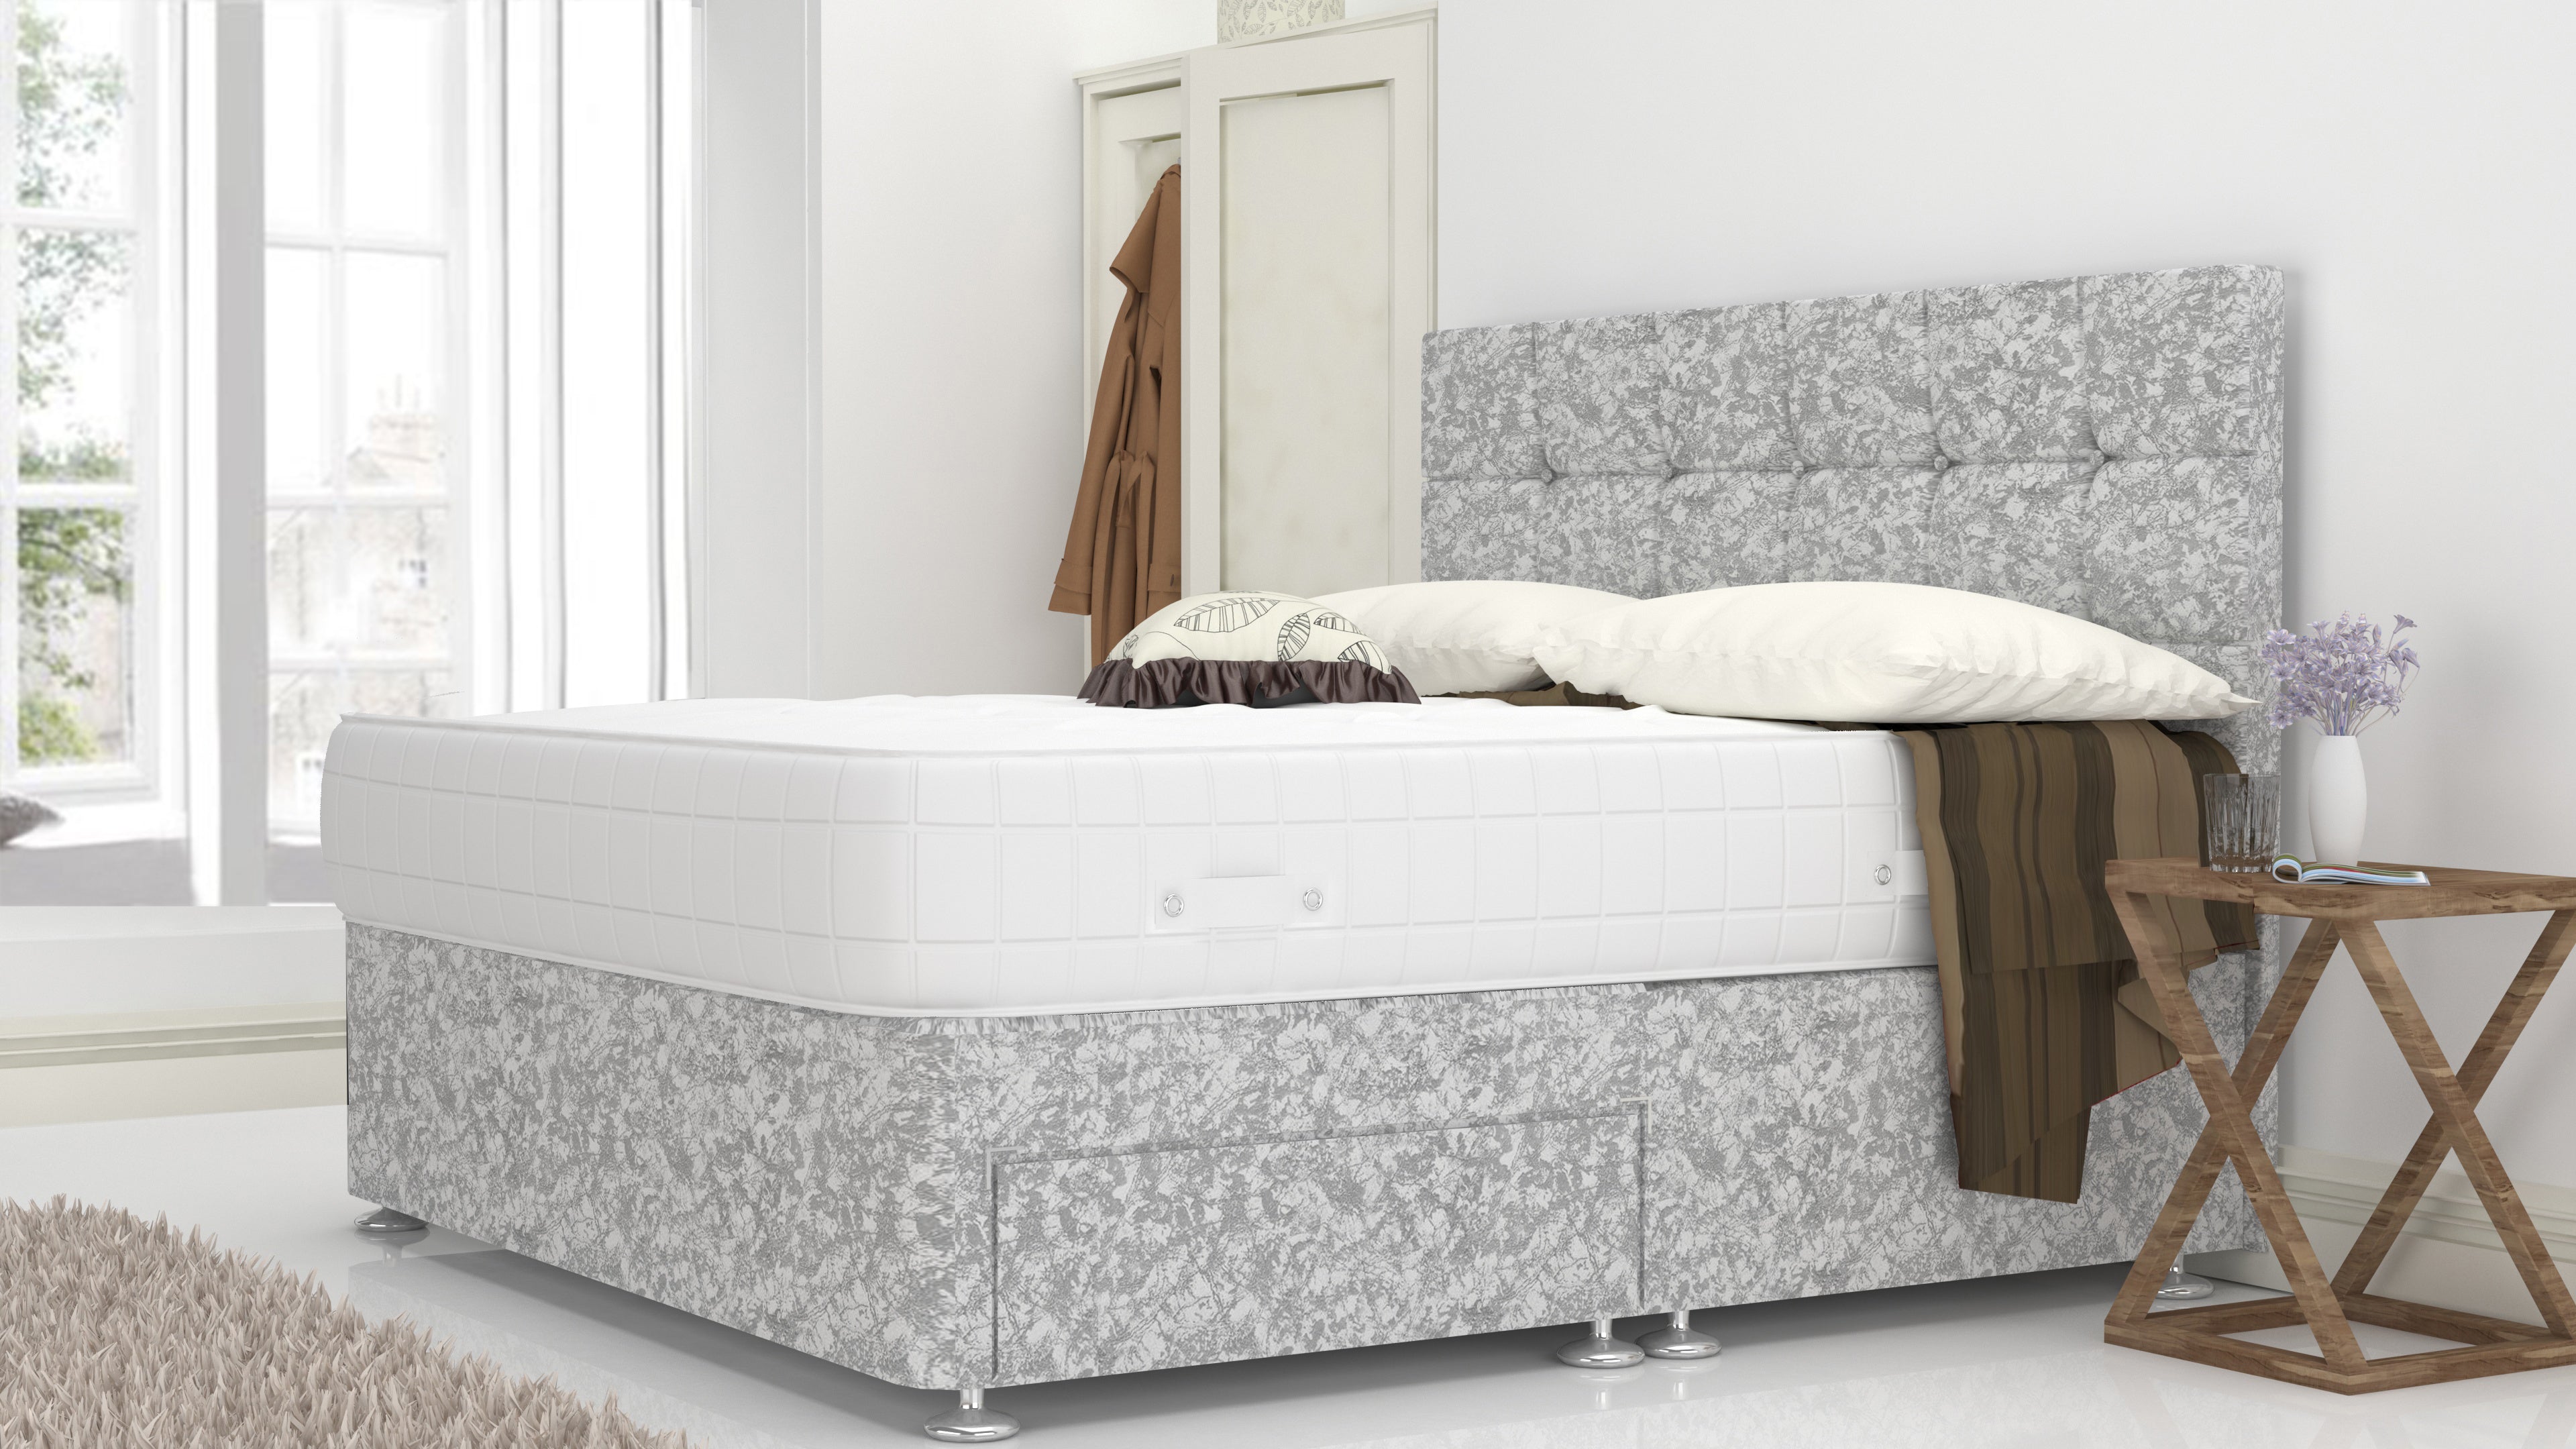 Silver Crushed 4 Feet Divan Bed Set With Cube Headboard (Included Feet) And Free Orthopedic Mattress